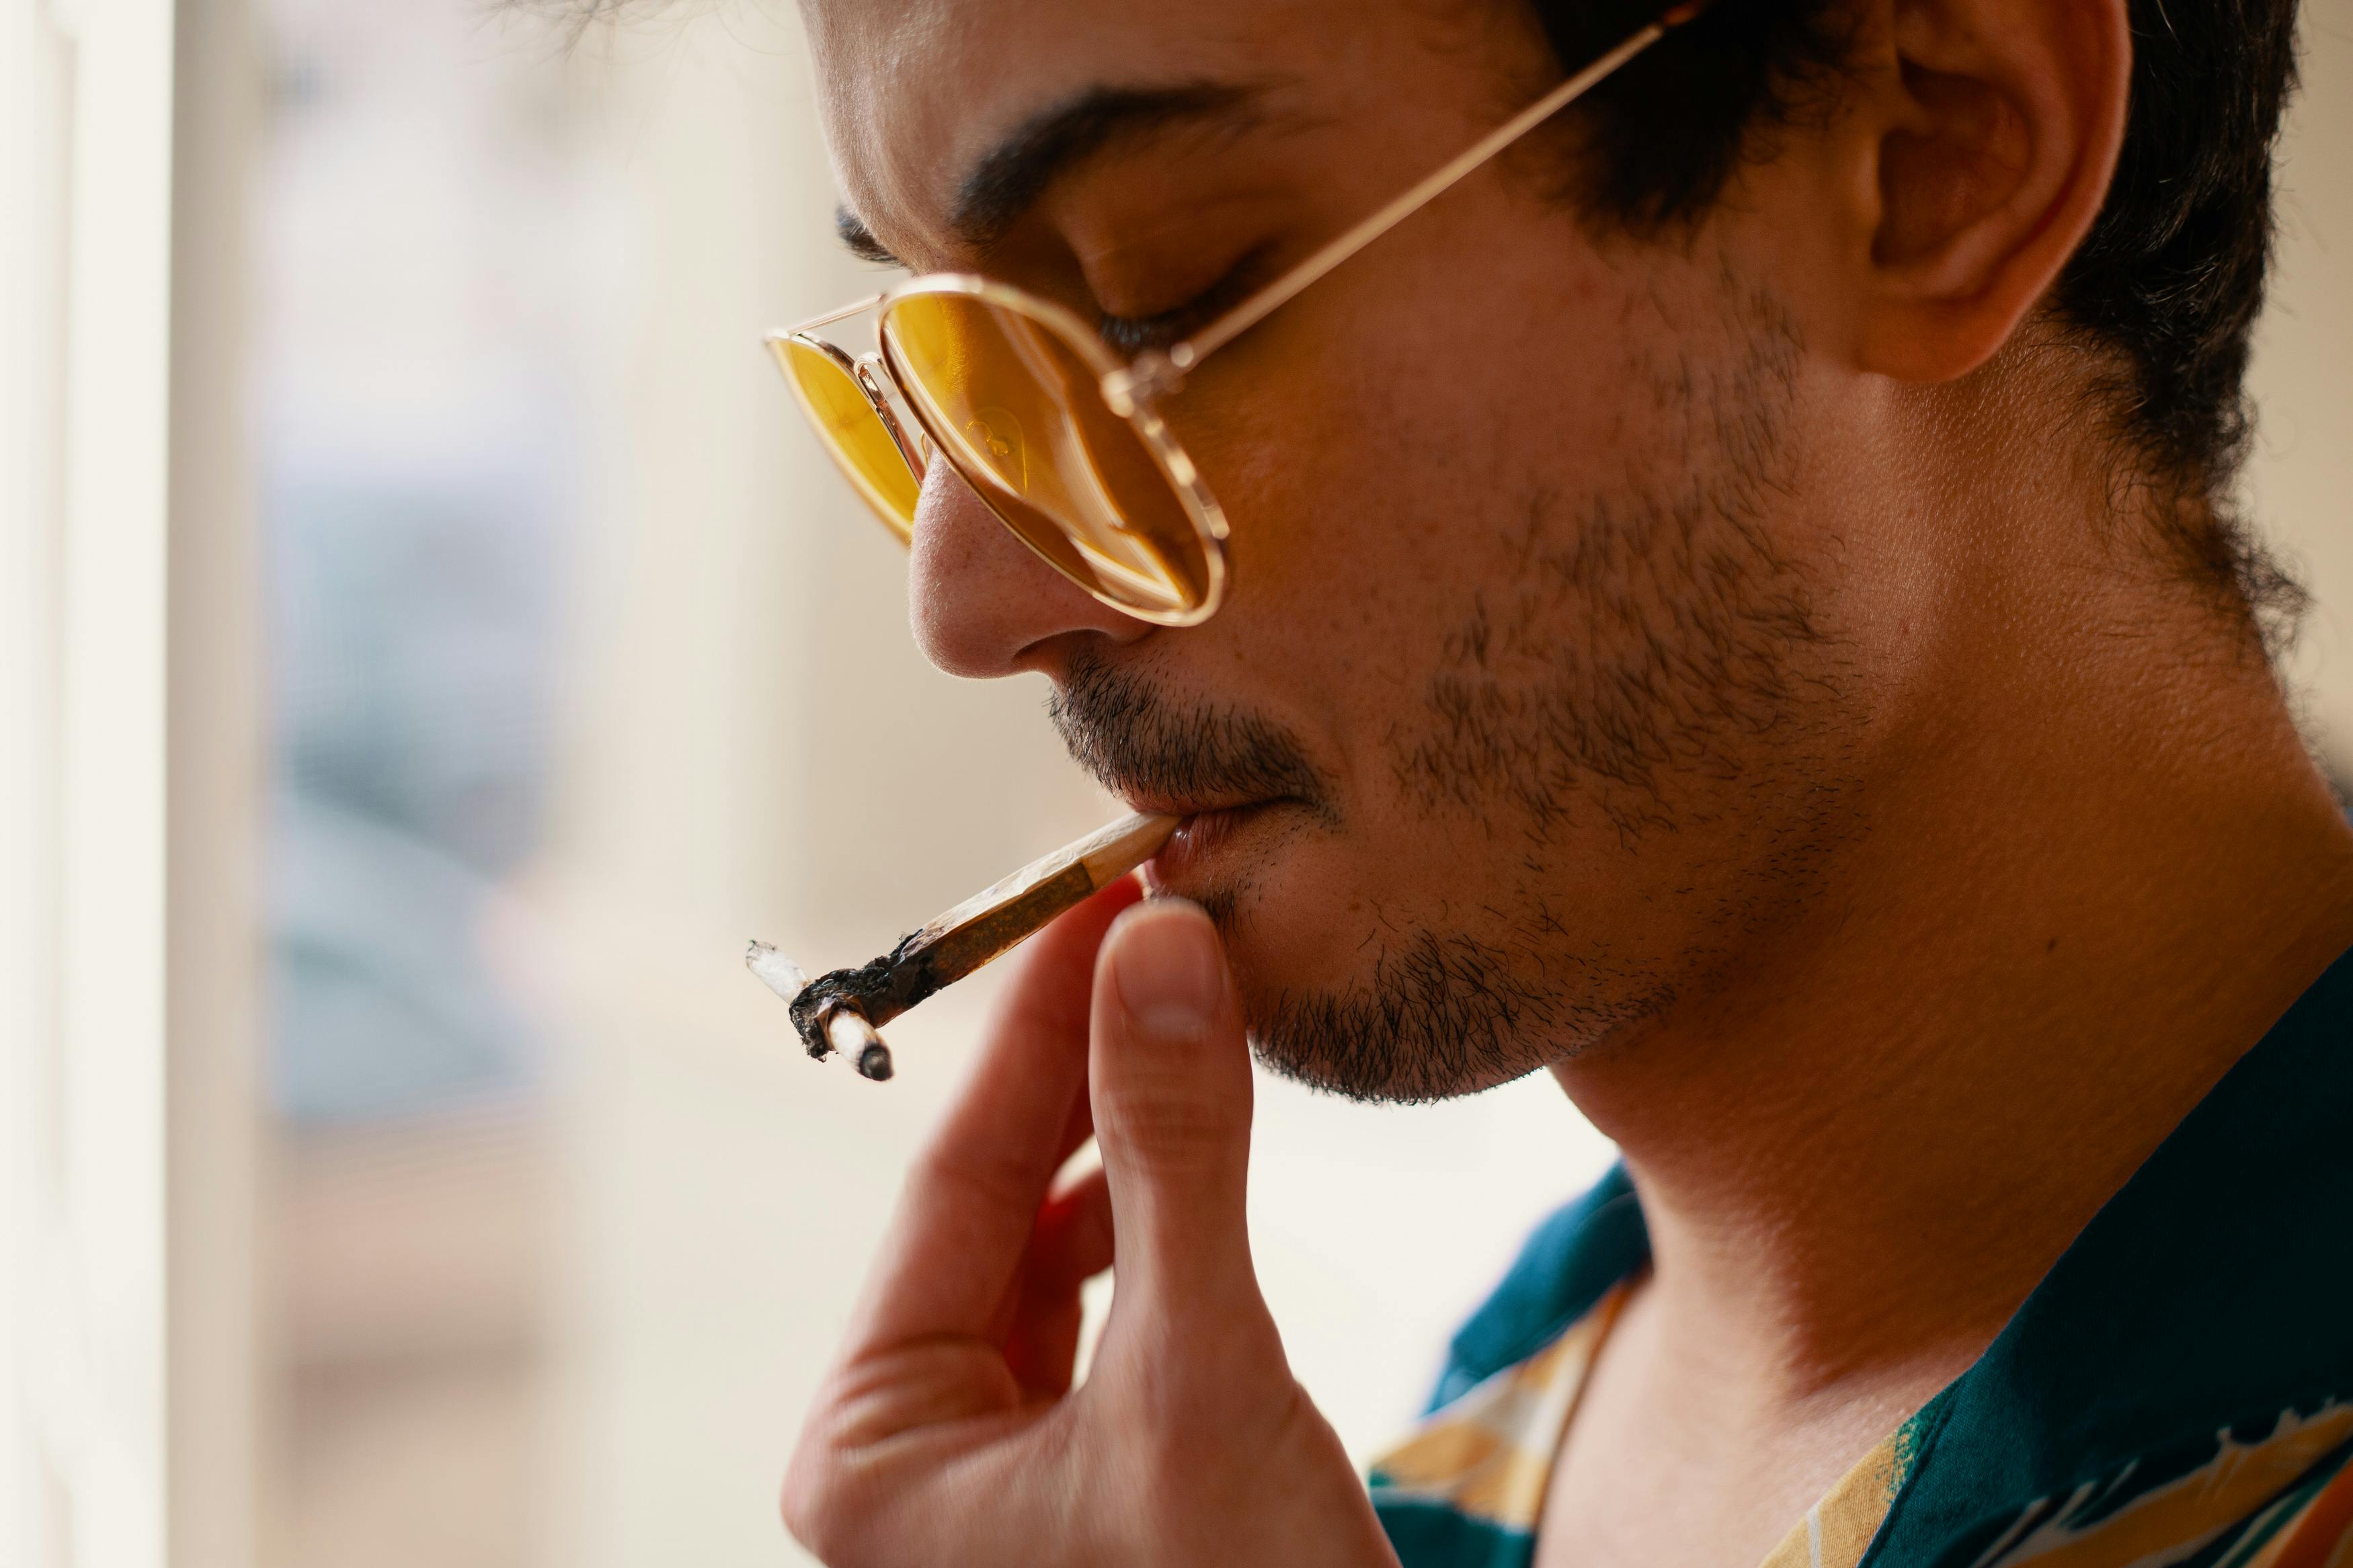 How to Get High For The First Time: A man wearing sunglasses smokes a joint